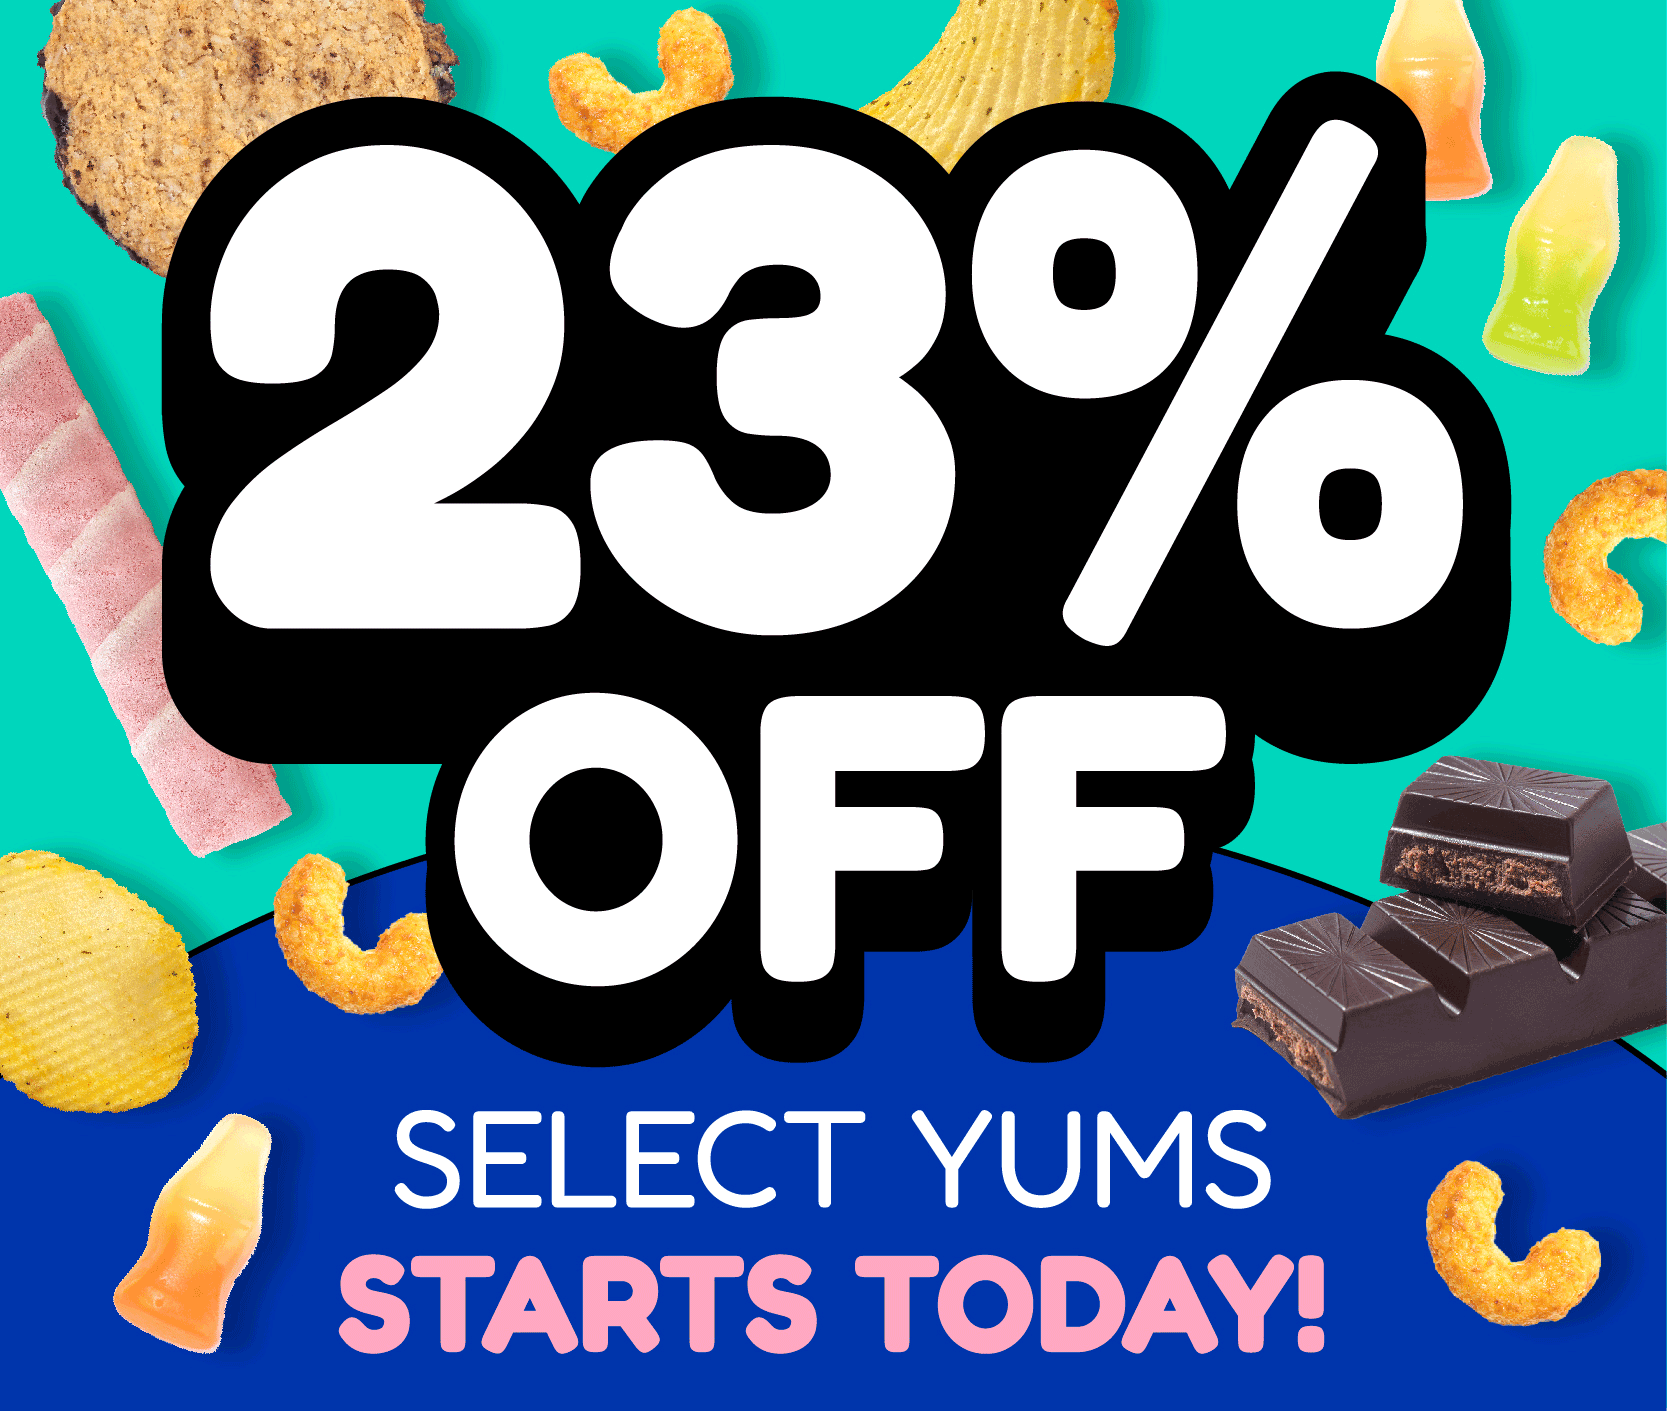 23% OFF SELECT YUMS STARTING TODAY!